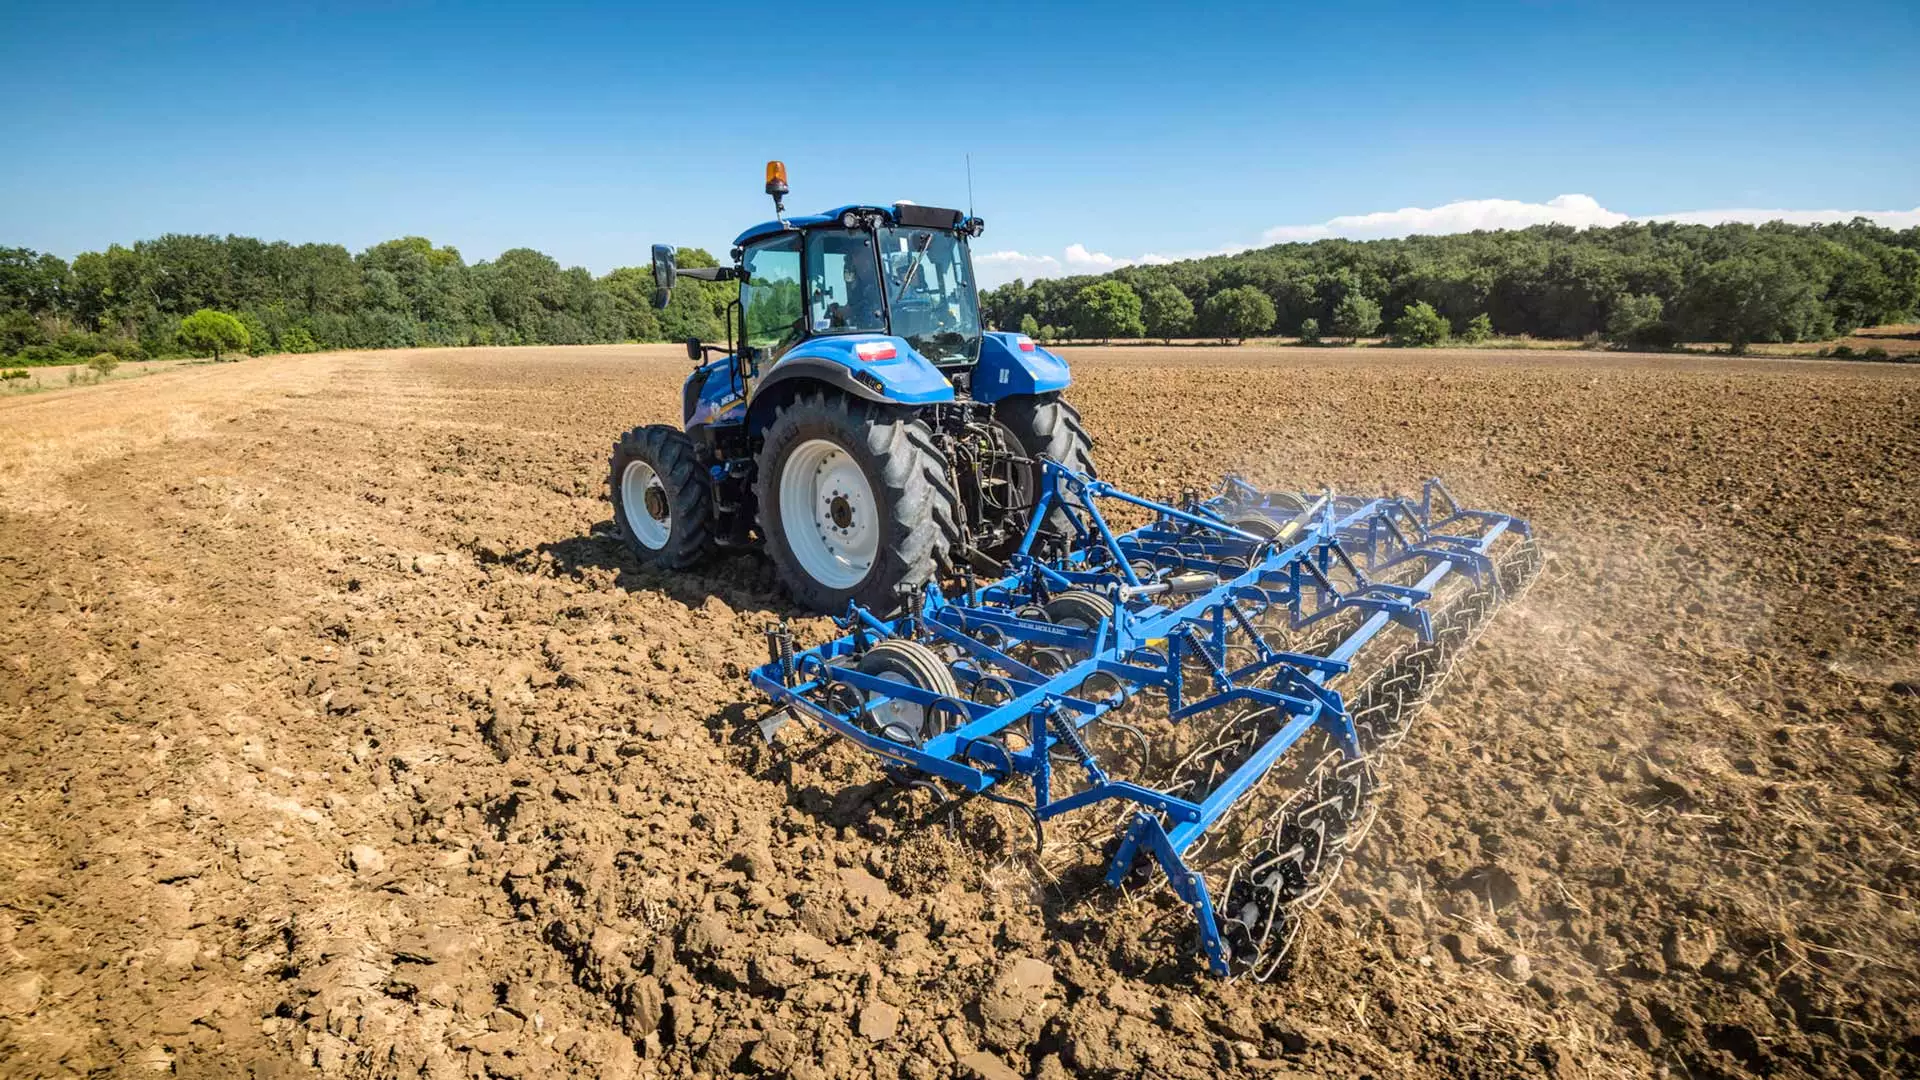 On-field operation of New Holland tractor equipped with spring tine cultivators for soil cultivation